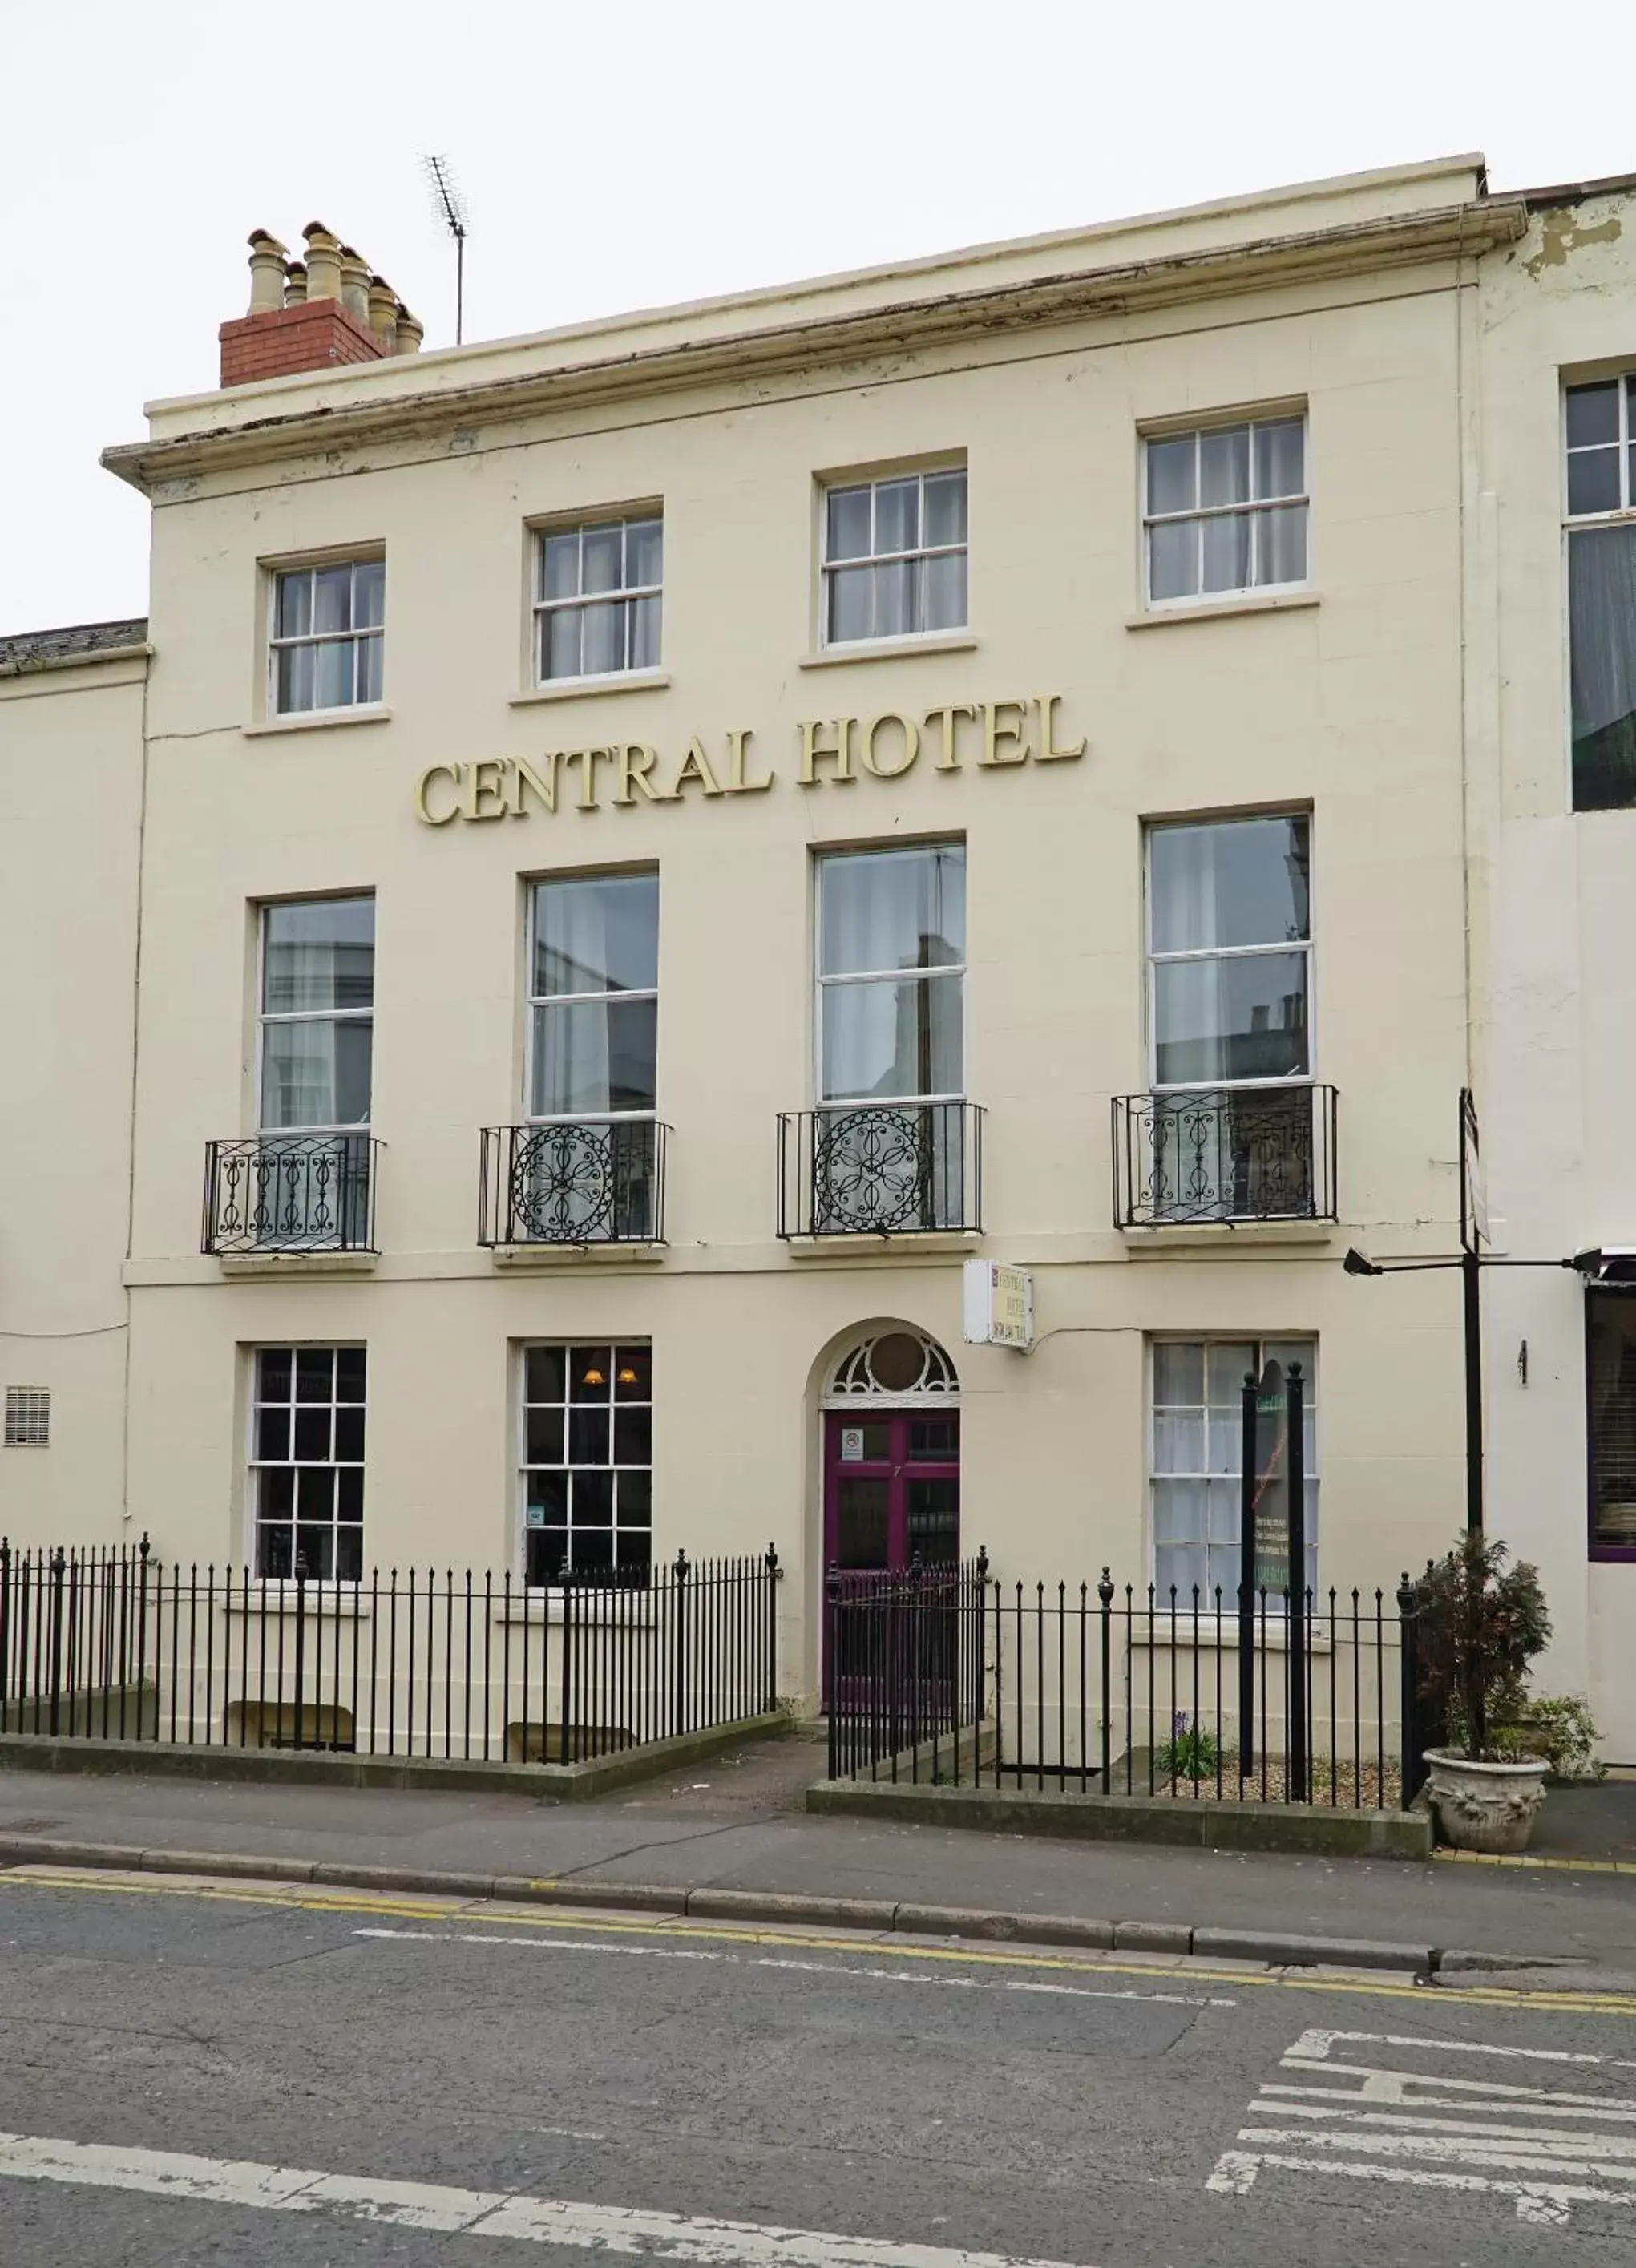 Property Building in Central Hotel Cheltenham by Roomsbooked